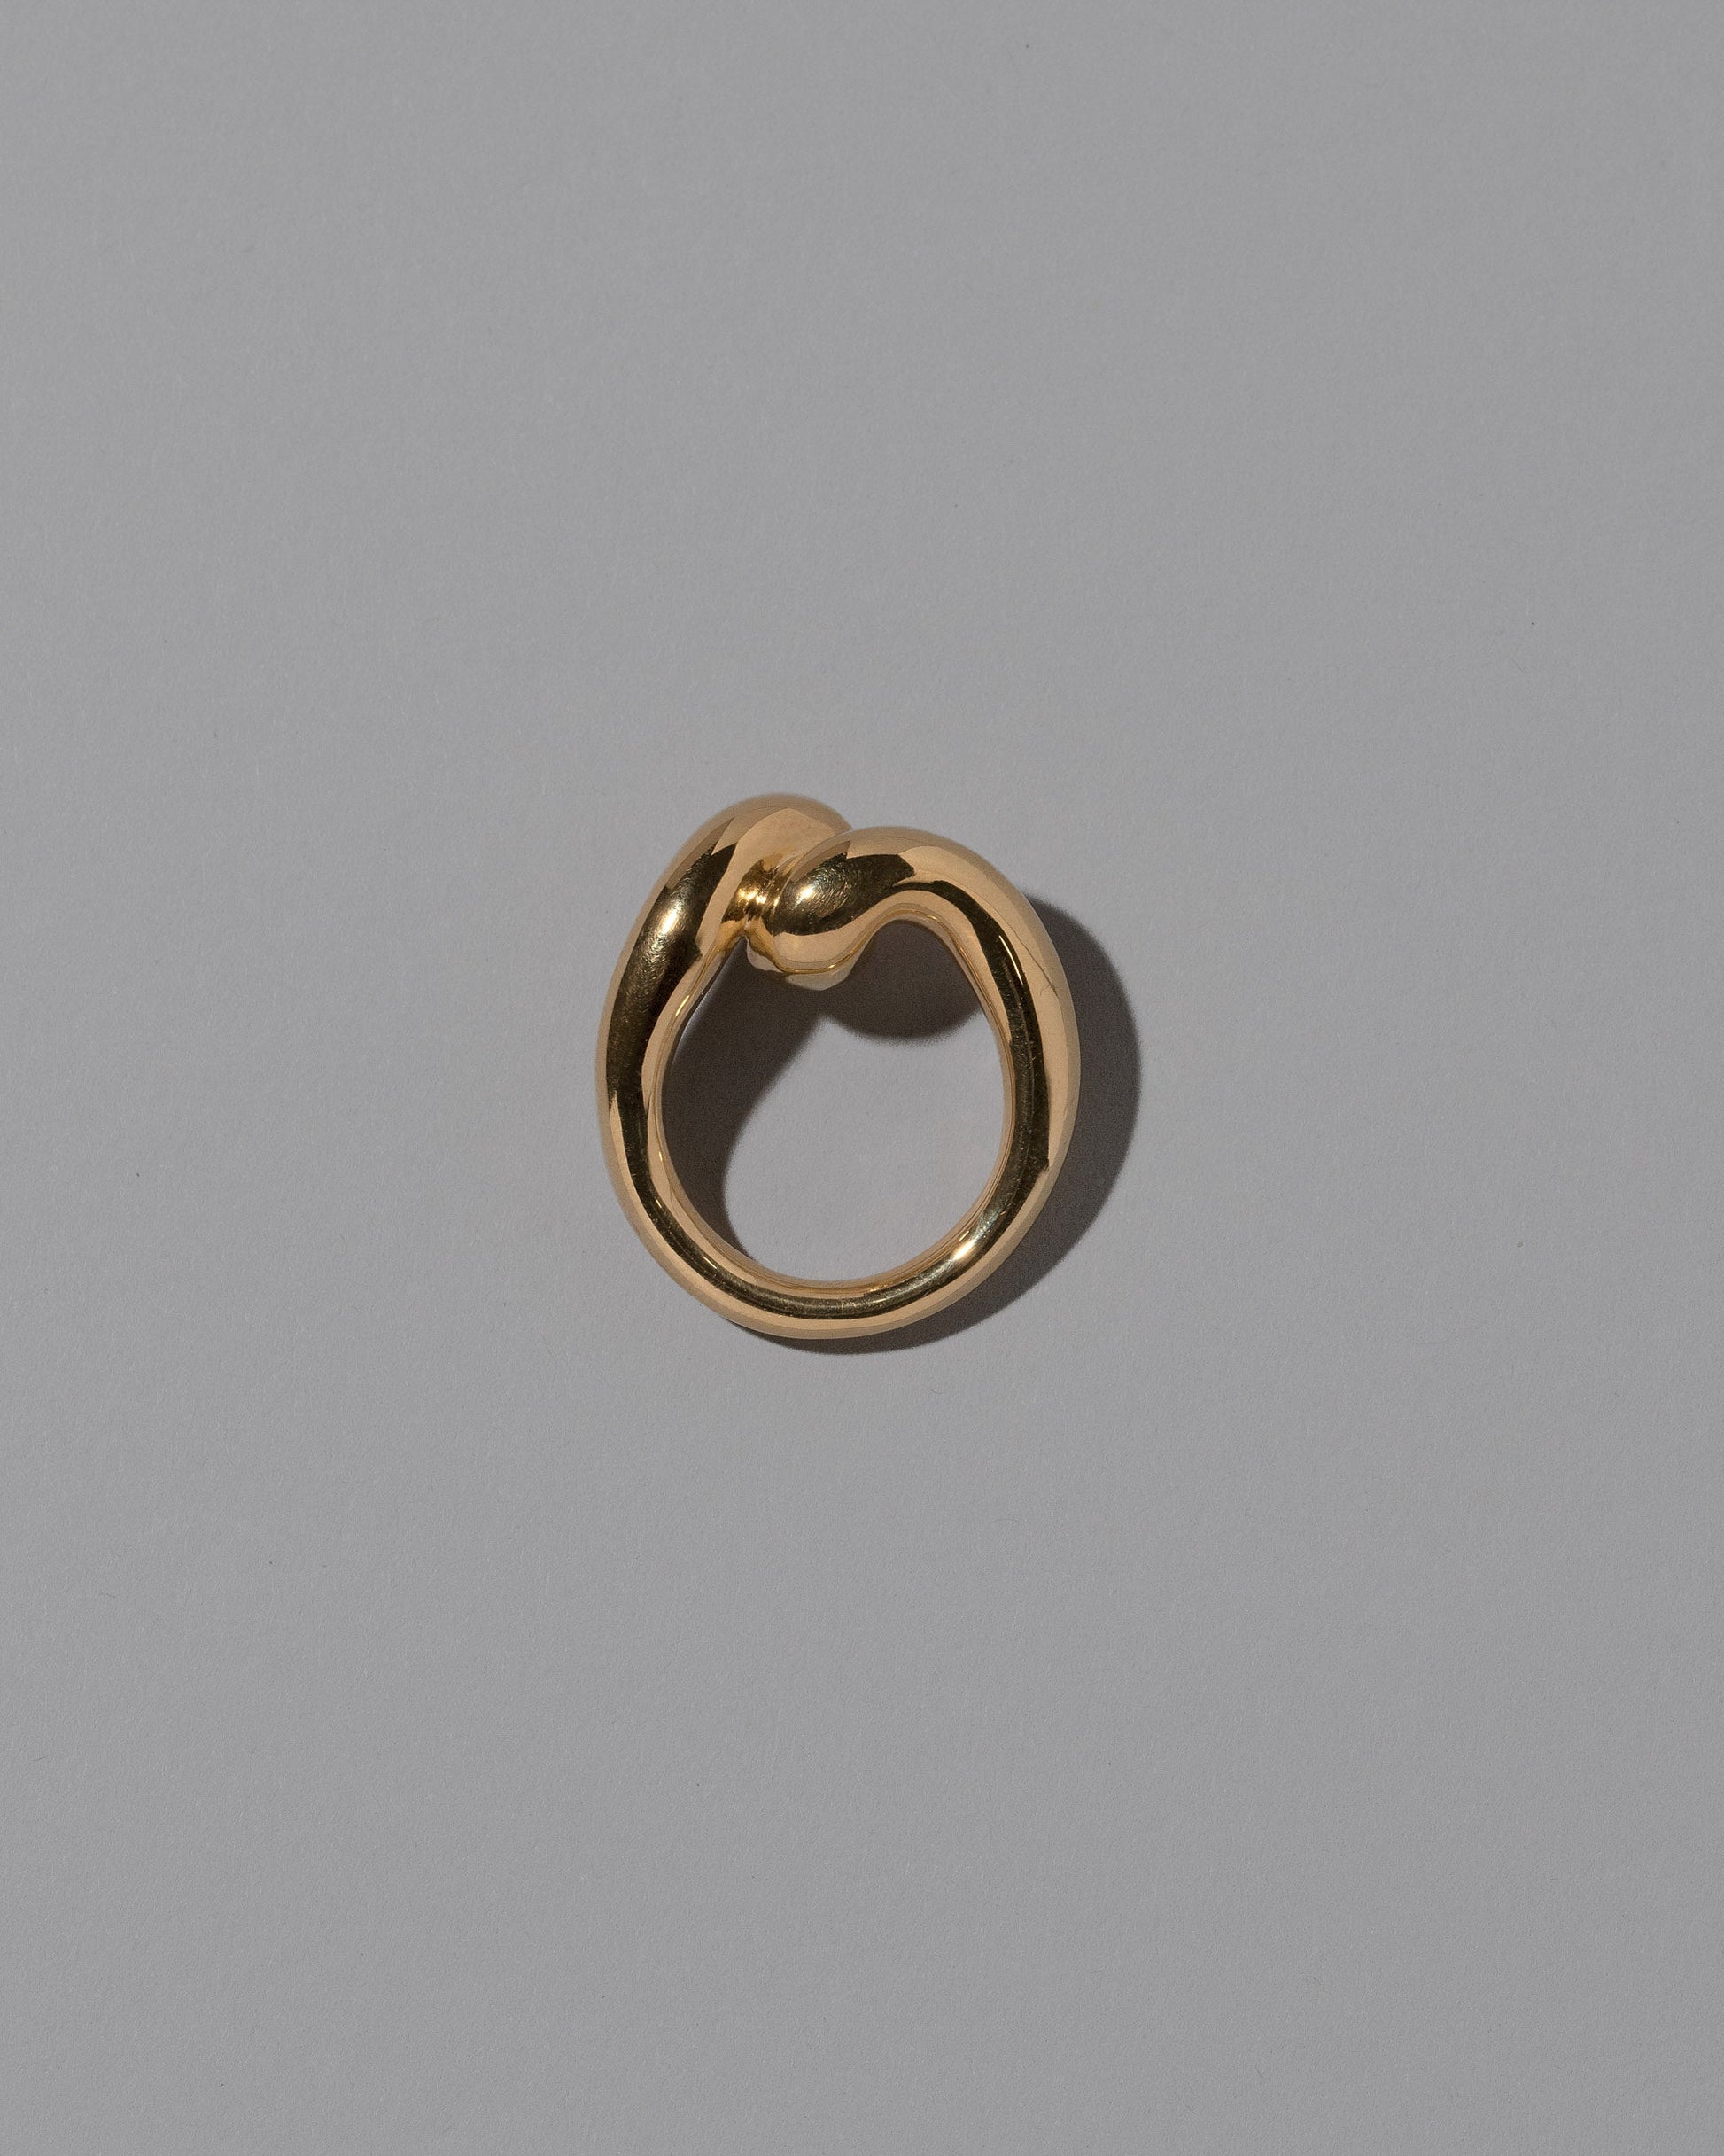 View from the side of the CRZM 22k Gold Landform Ring on light color background.